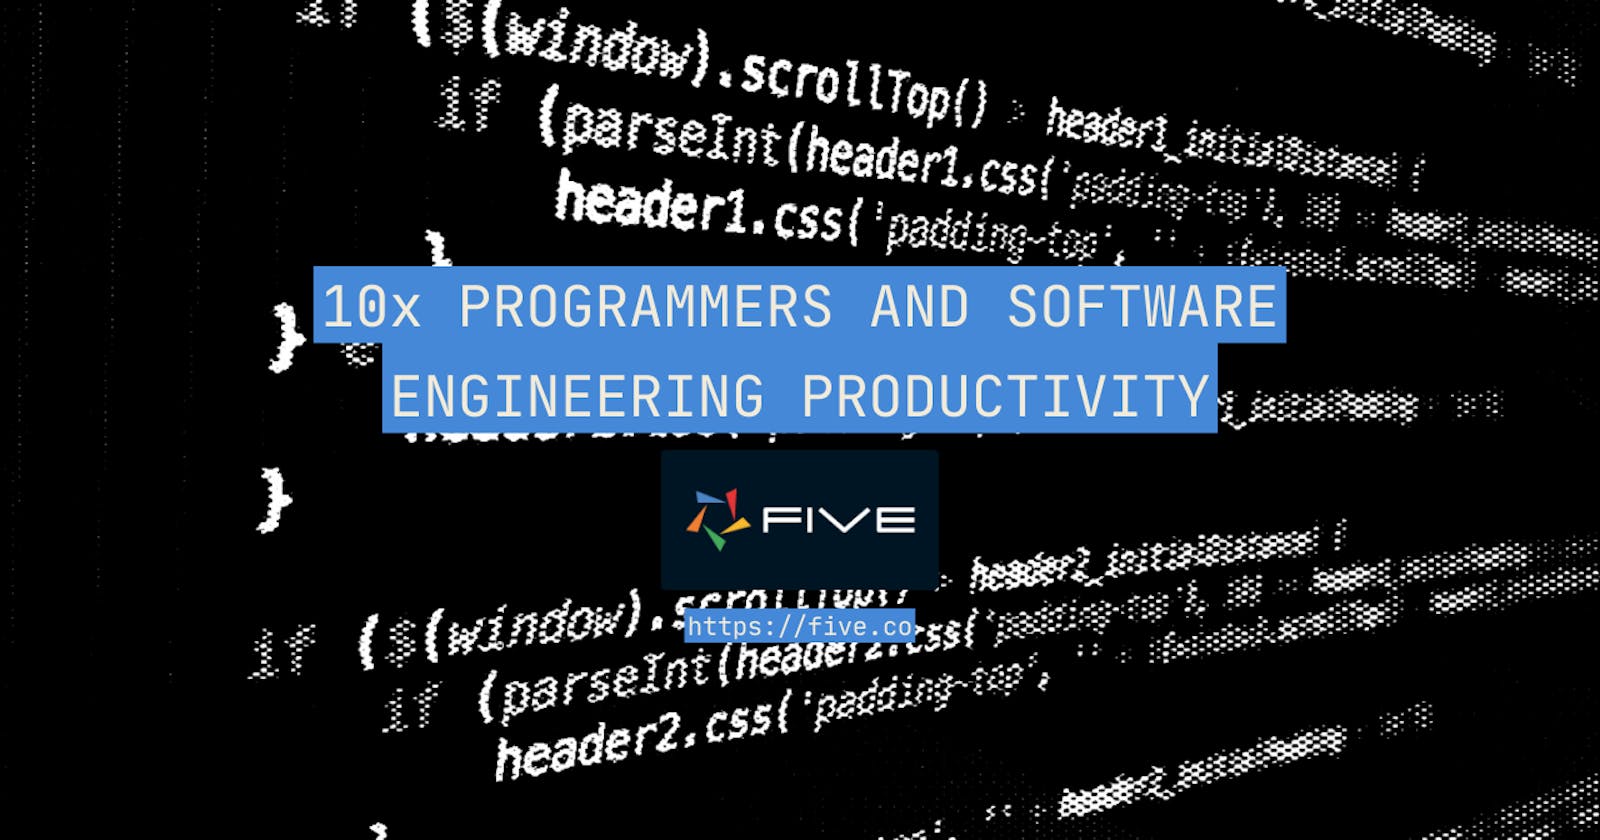 10x Programmers: How to Increase Software Engineering Productivity